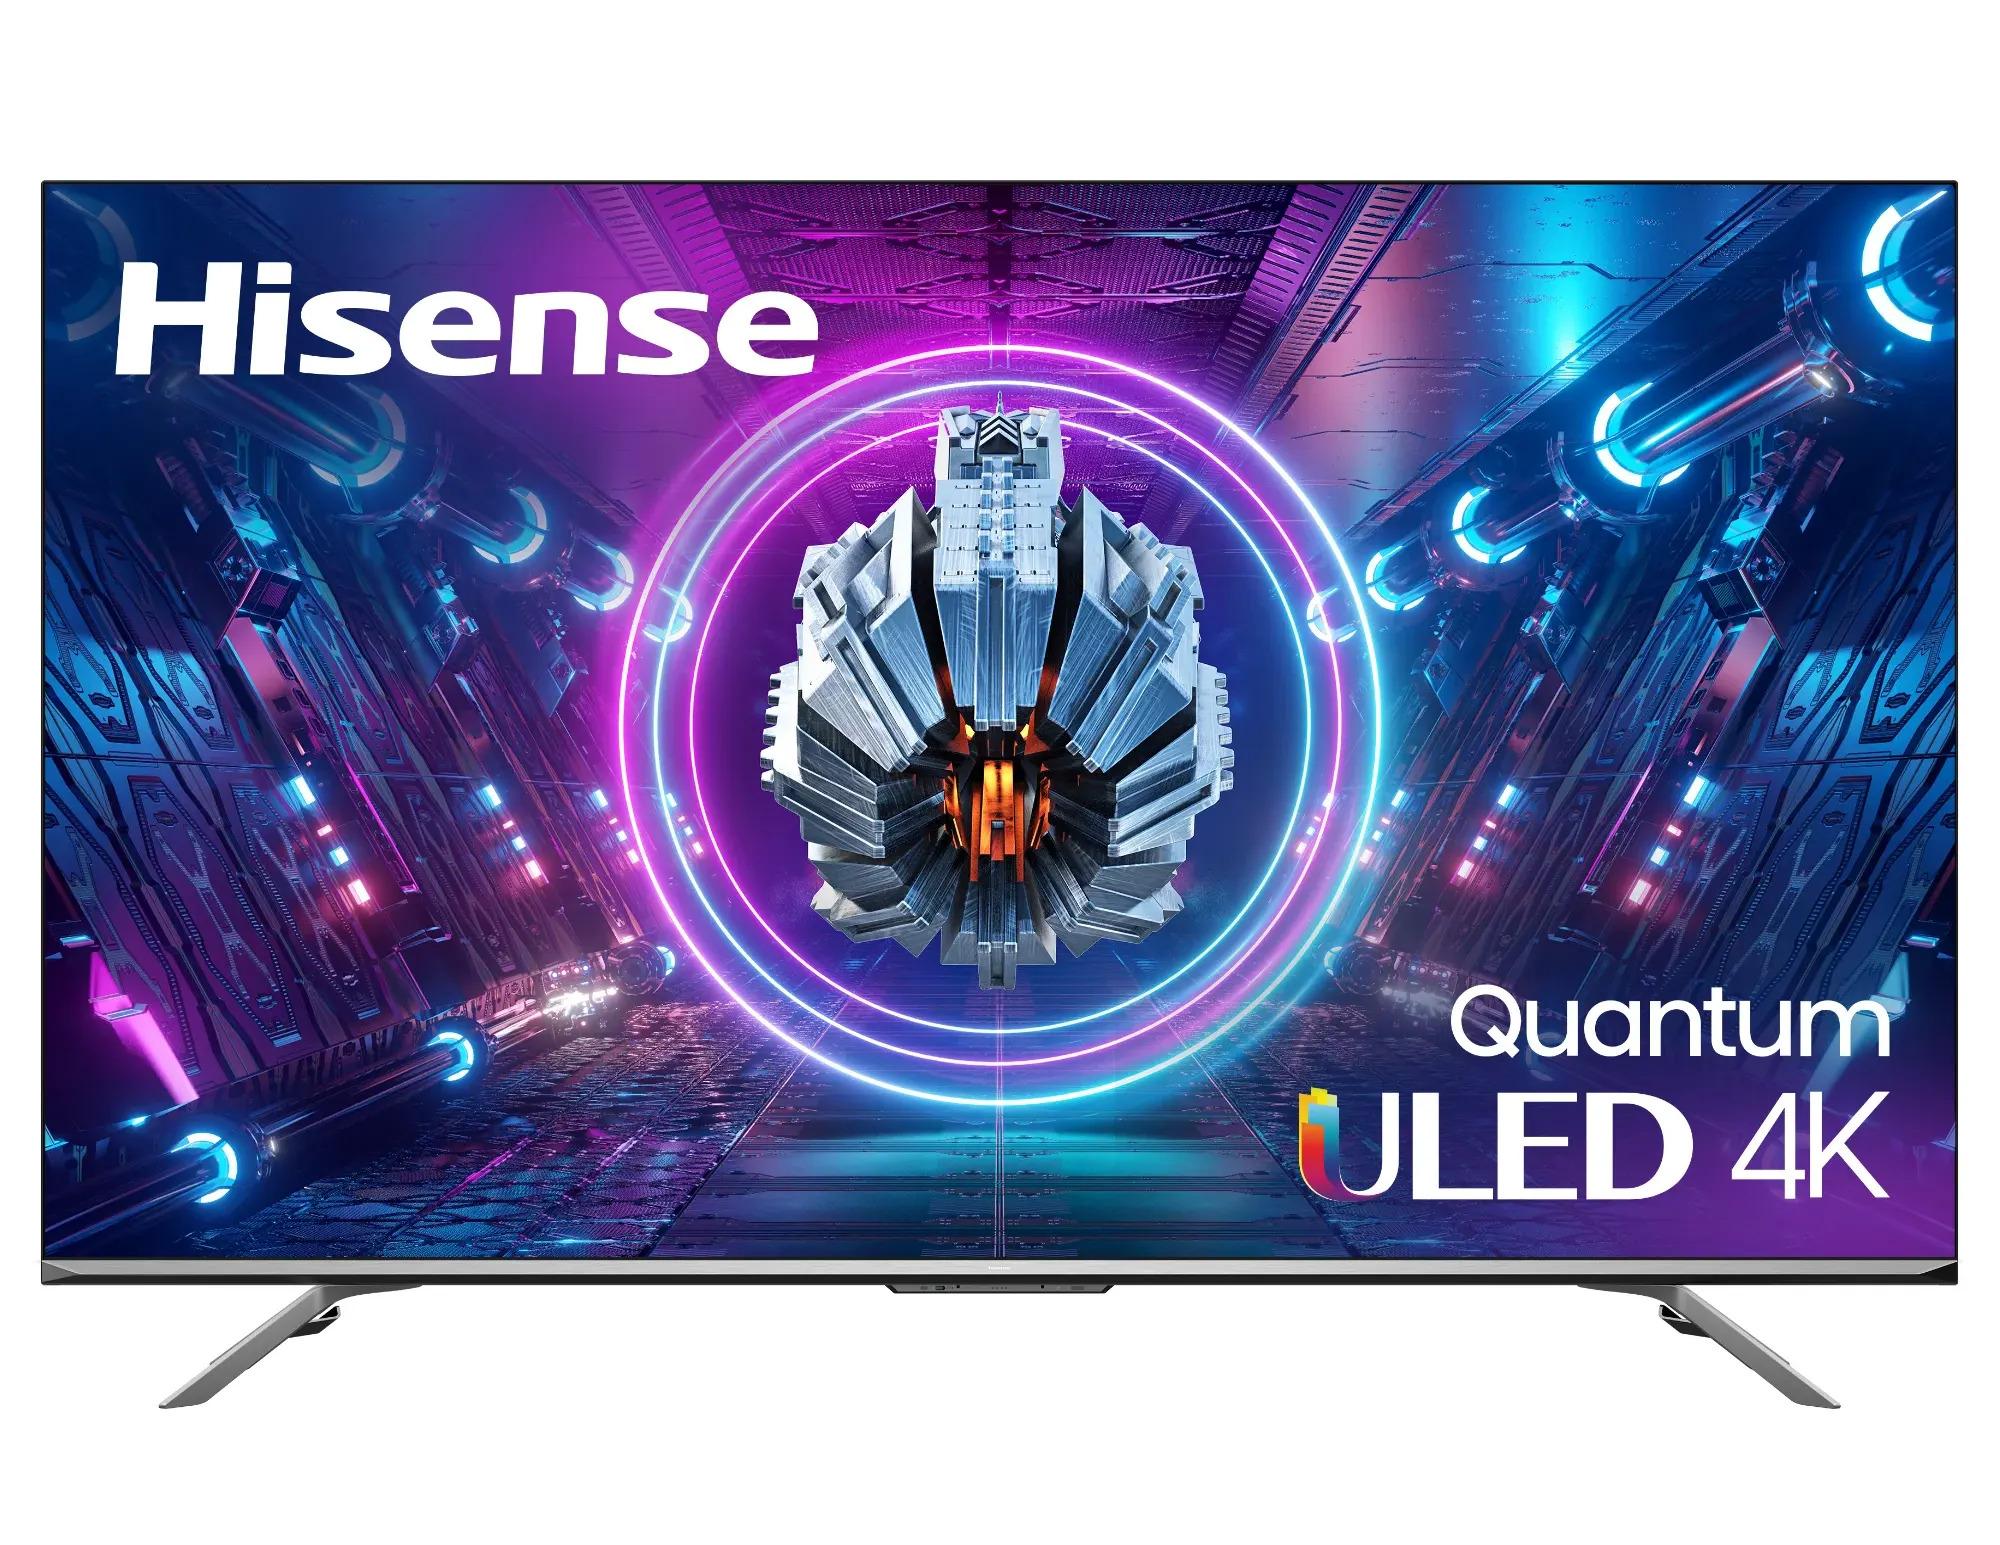 65in Hisense U7G Series Quantum ULED 4K Android TV for $699.99 Shipped